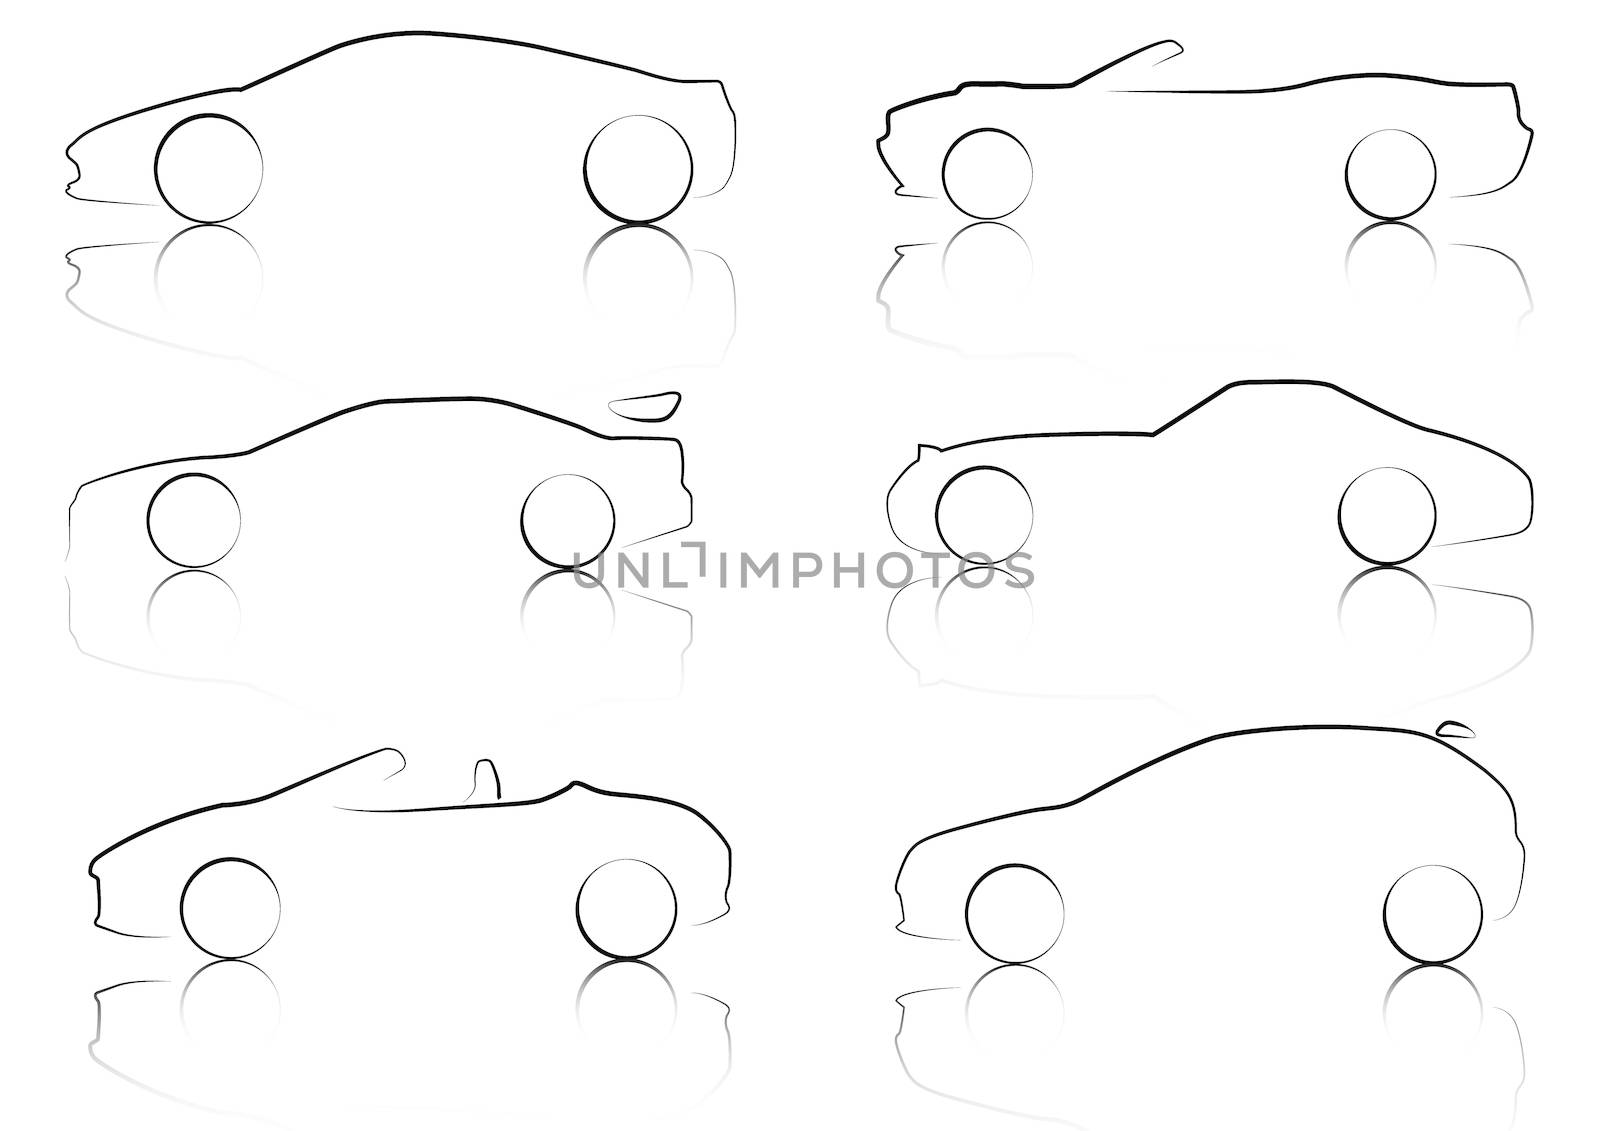 Illustration of Outlines of Cars by DragonEyeMedia